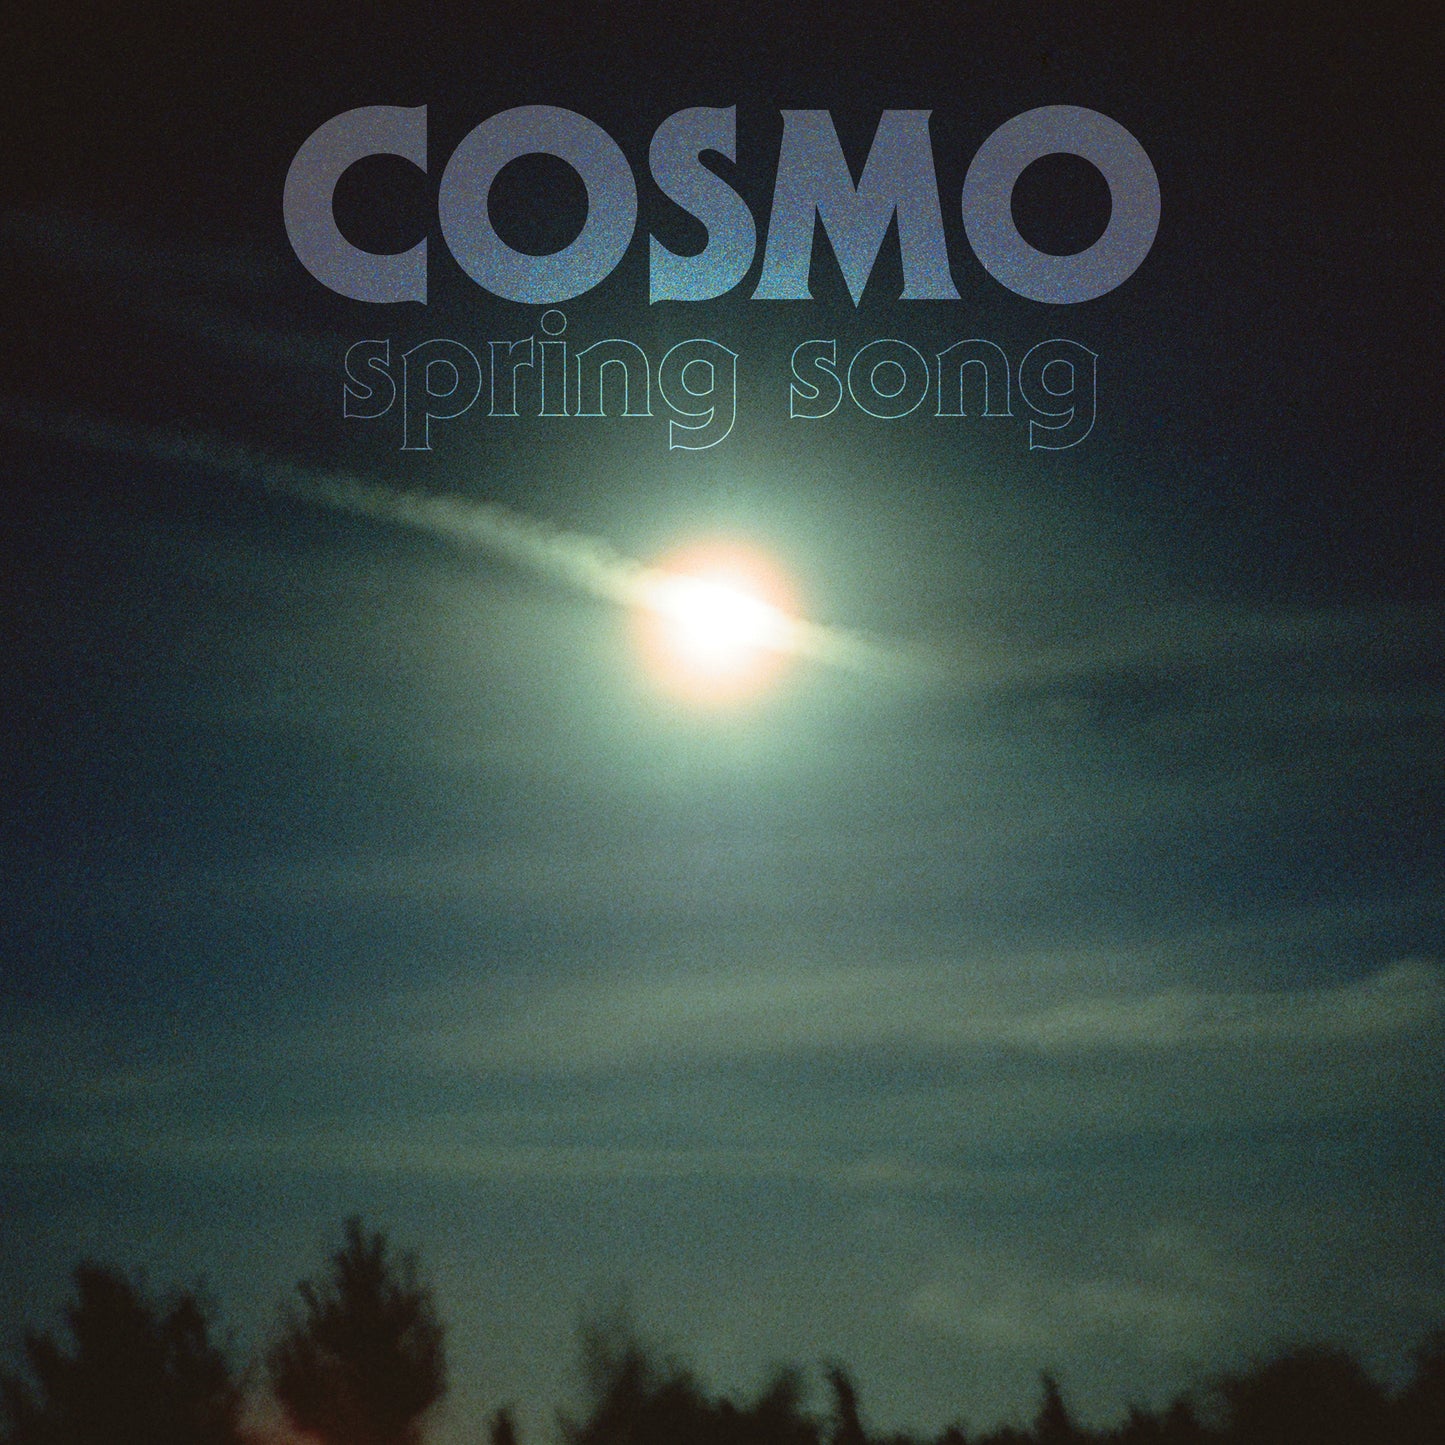 Cosmo: Spring Song